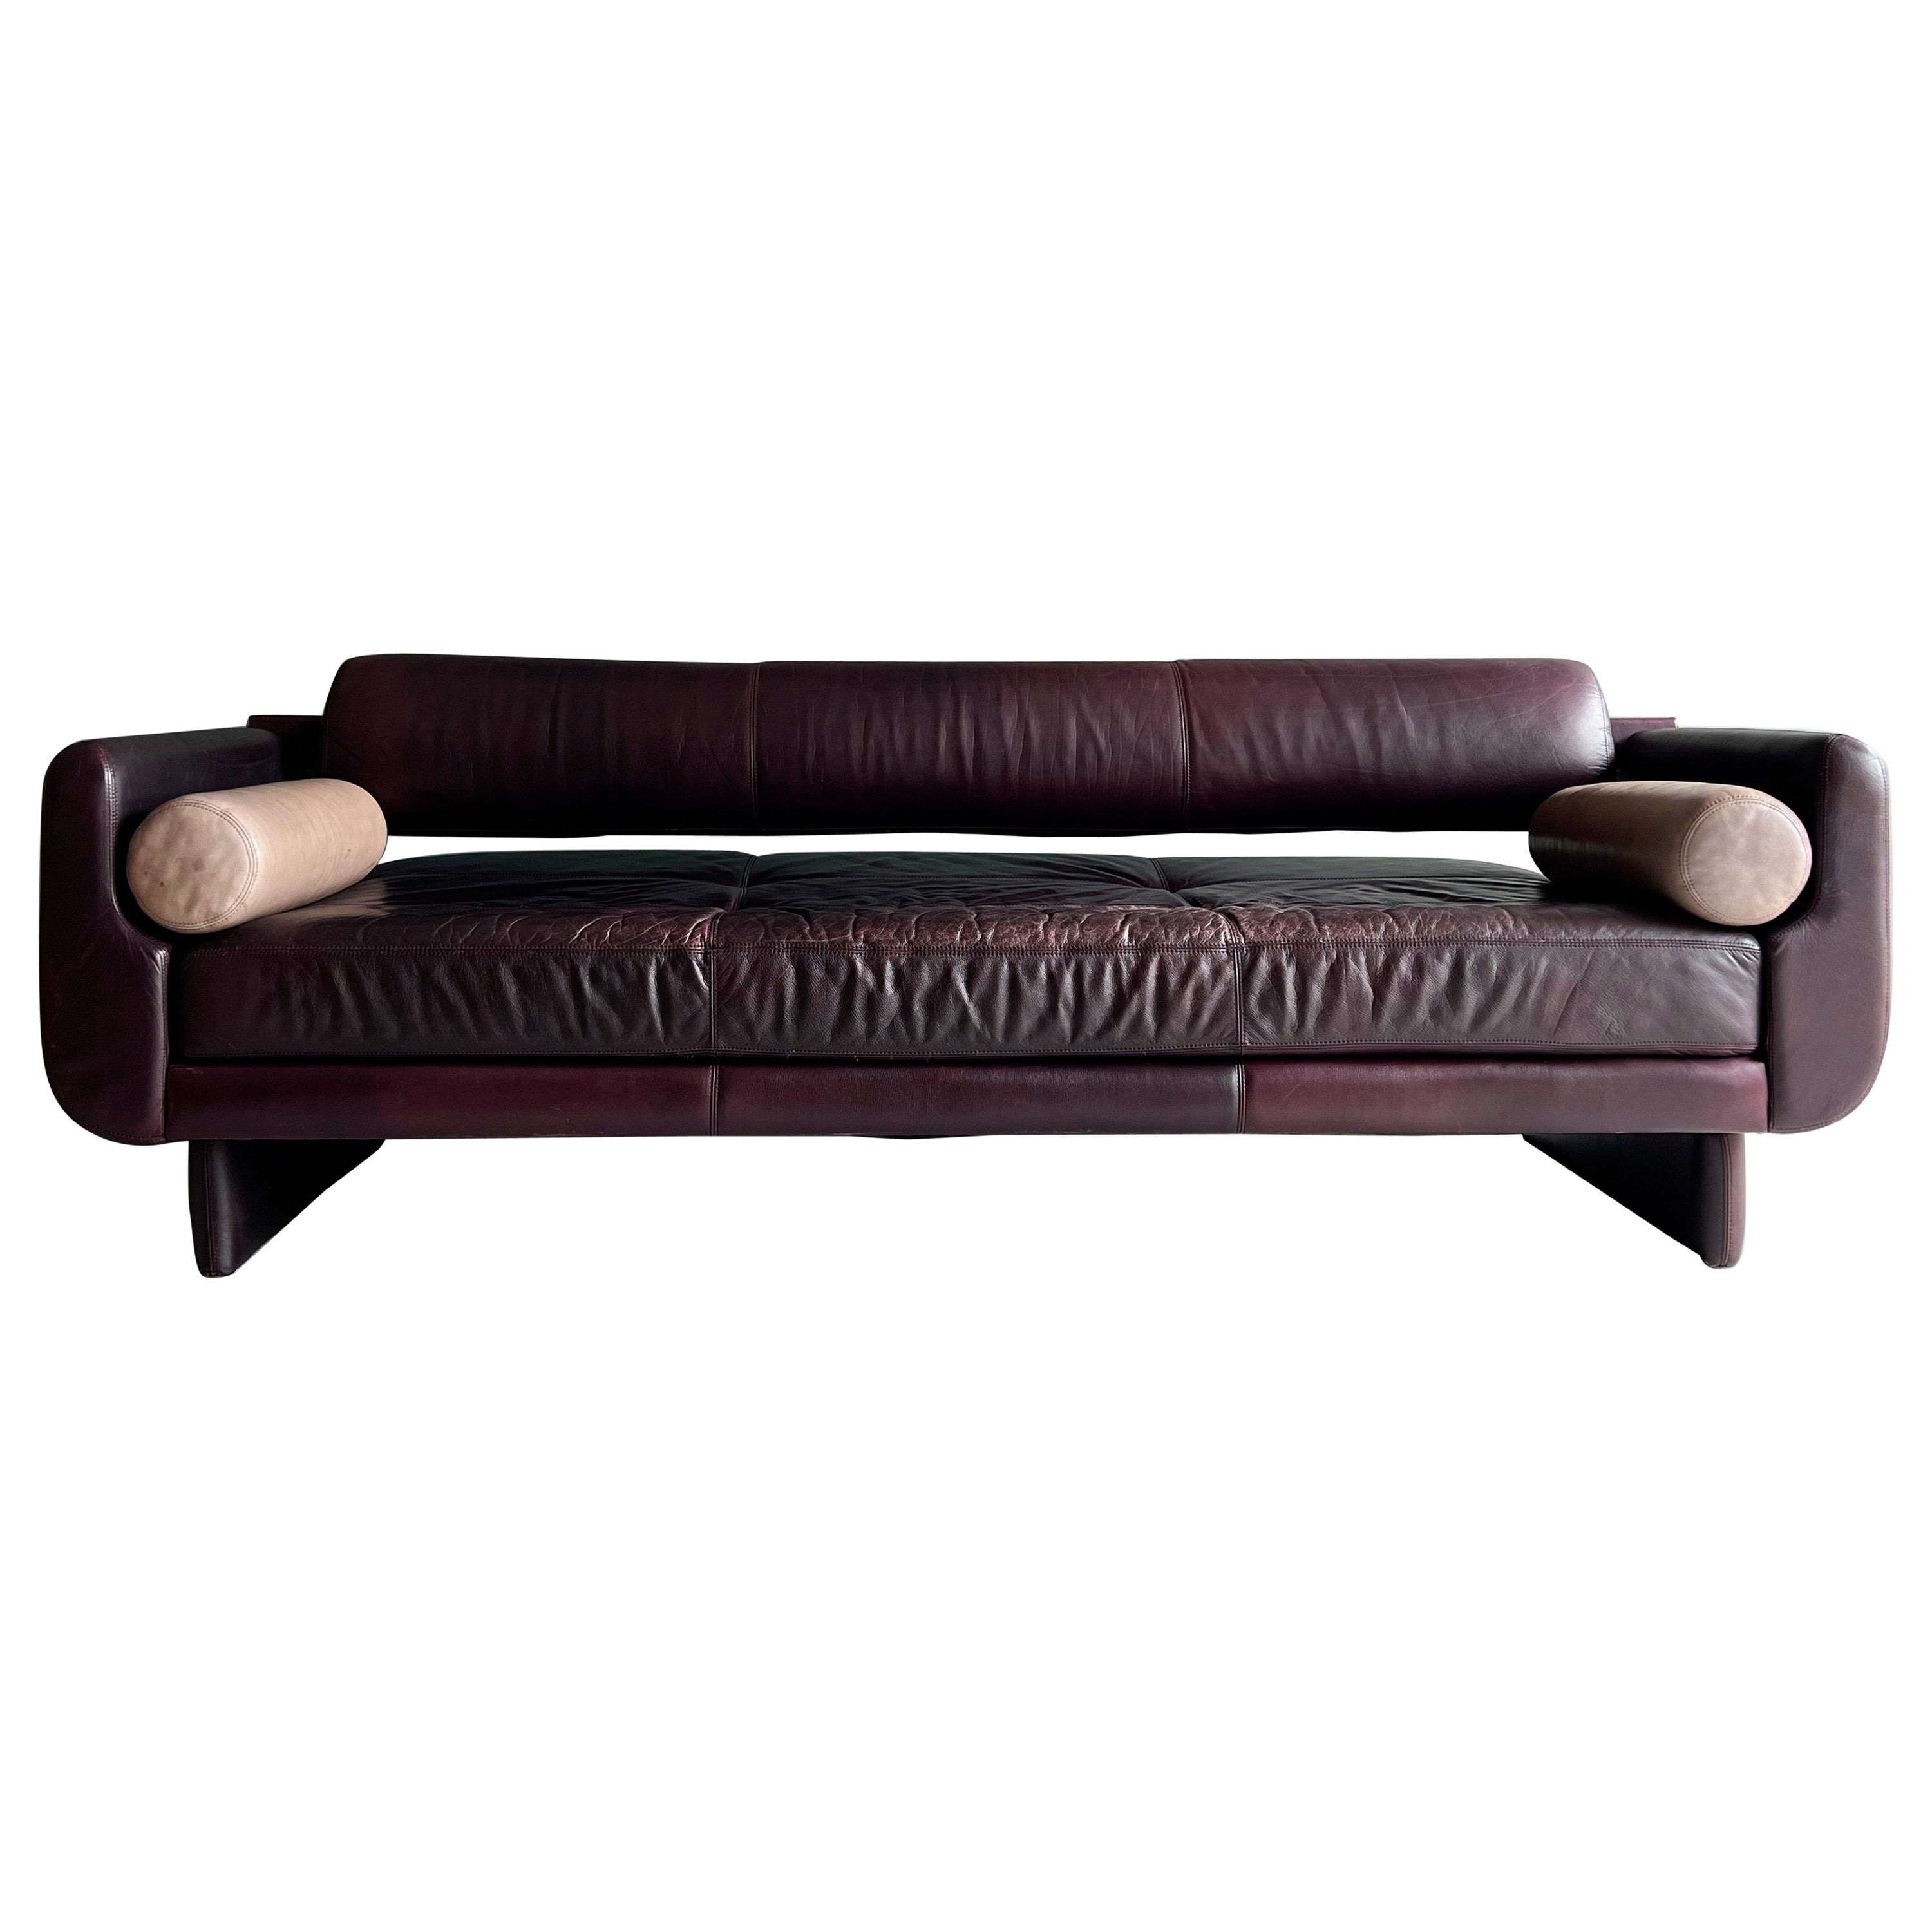 Beautiful “Matinee” Sofa / Daybed by Vladimir Kagan for American Leather